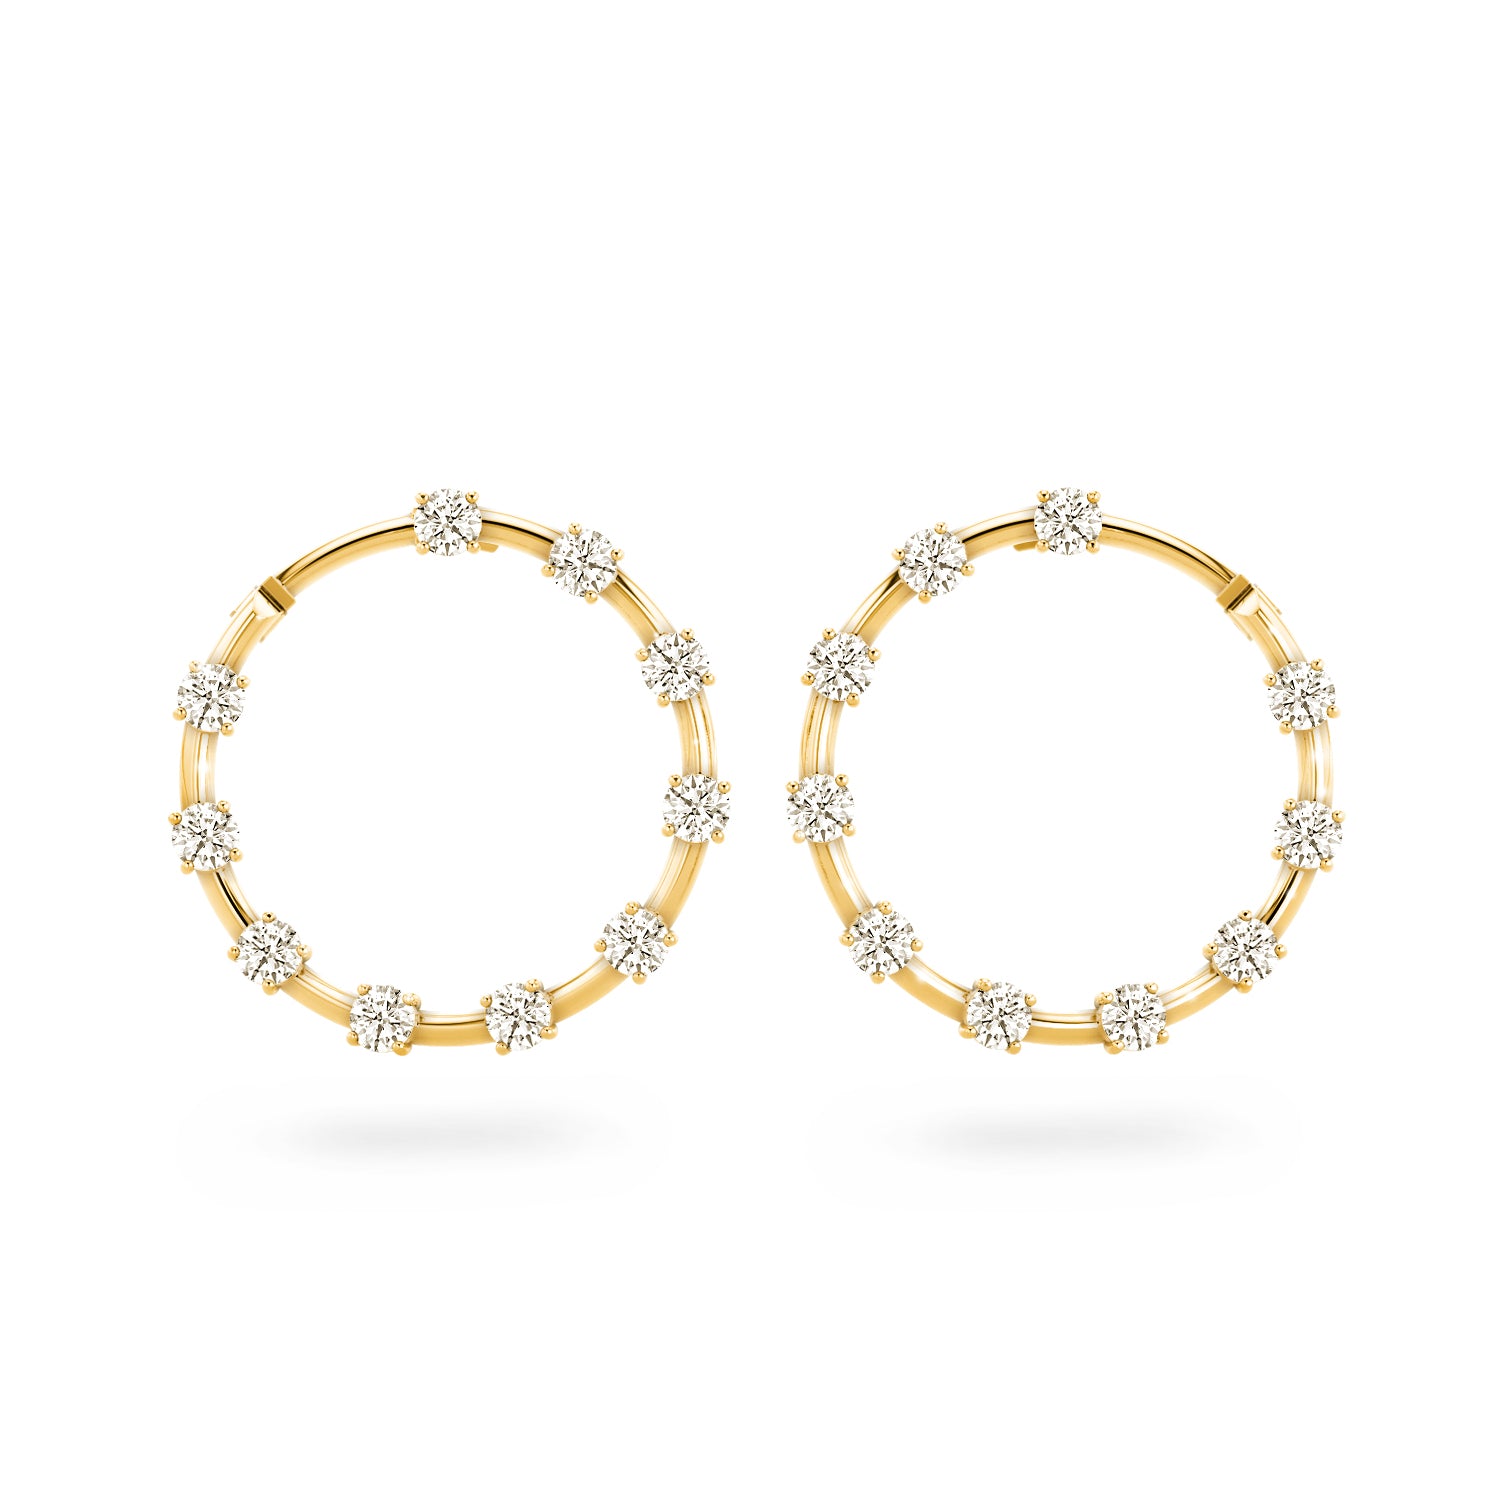 Shimansky - Crescent Diamond Hoop Earrings 2.00ct crafted in 14K Yellow Gold